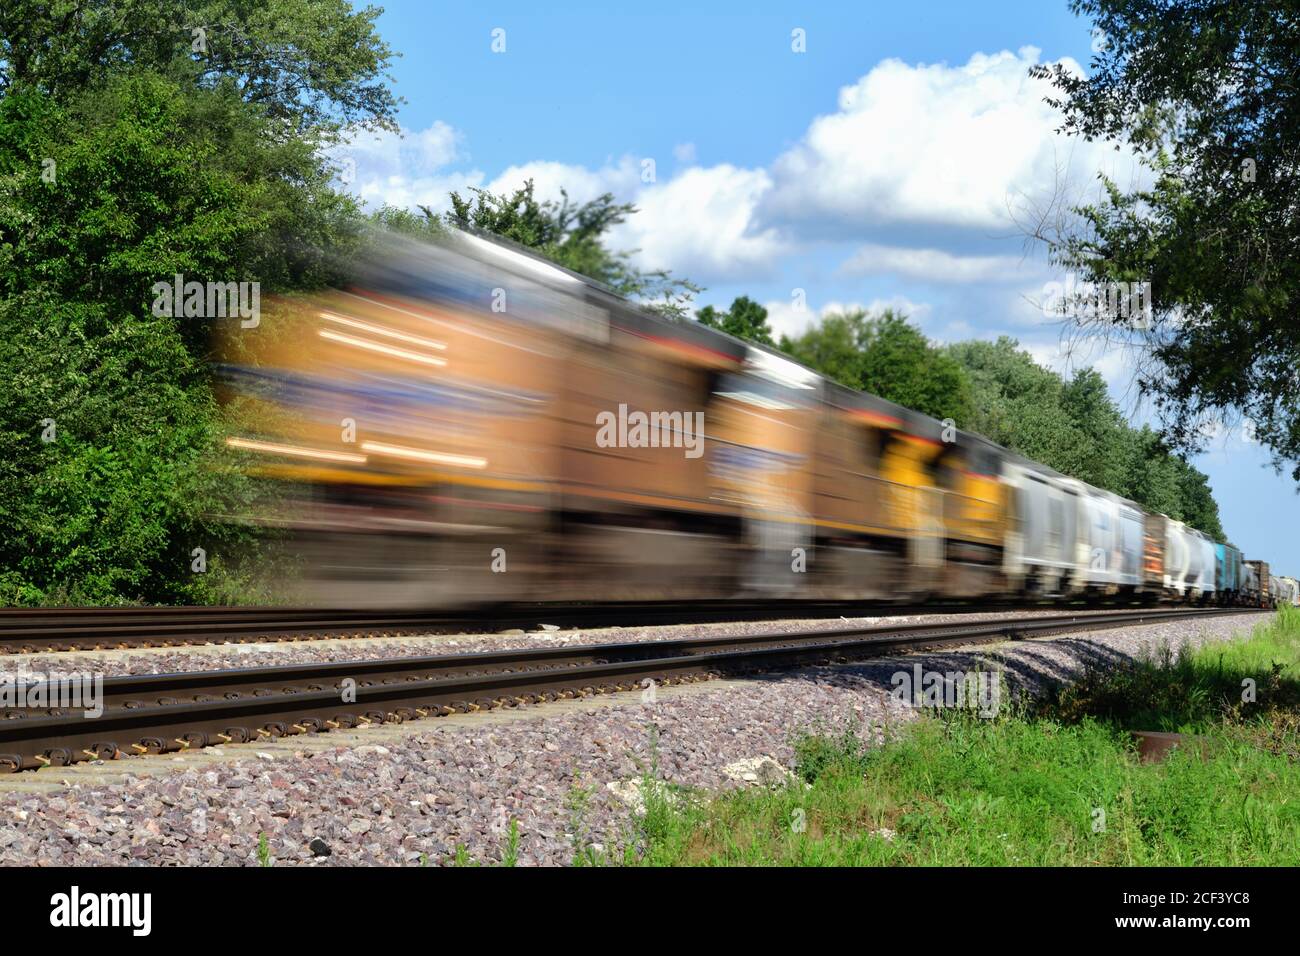 LaFox, Illinois, USA. A  Union Pacific freight train blurs as it streaks through LaFox, Illinois on its westward journey from Chicago. Stock Photo